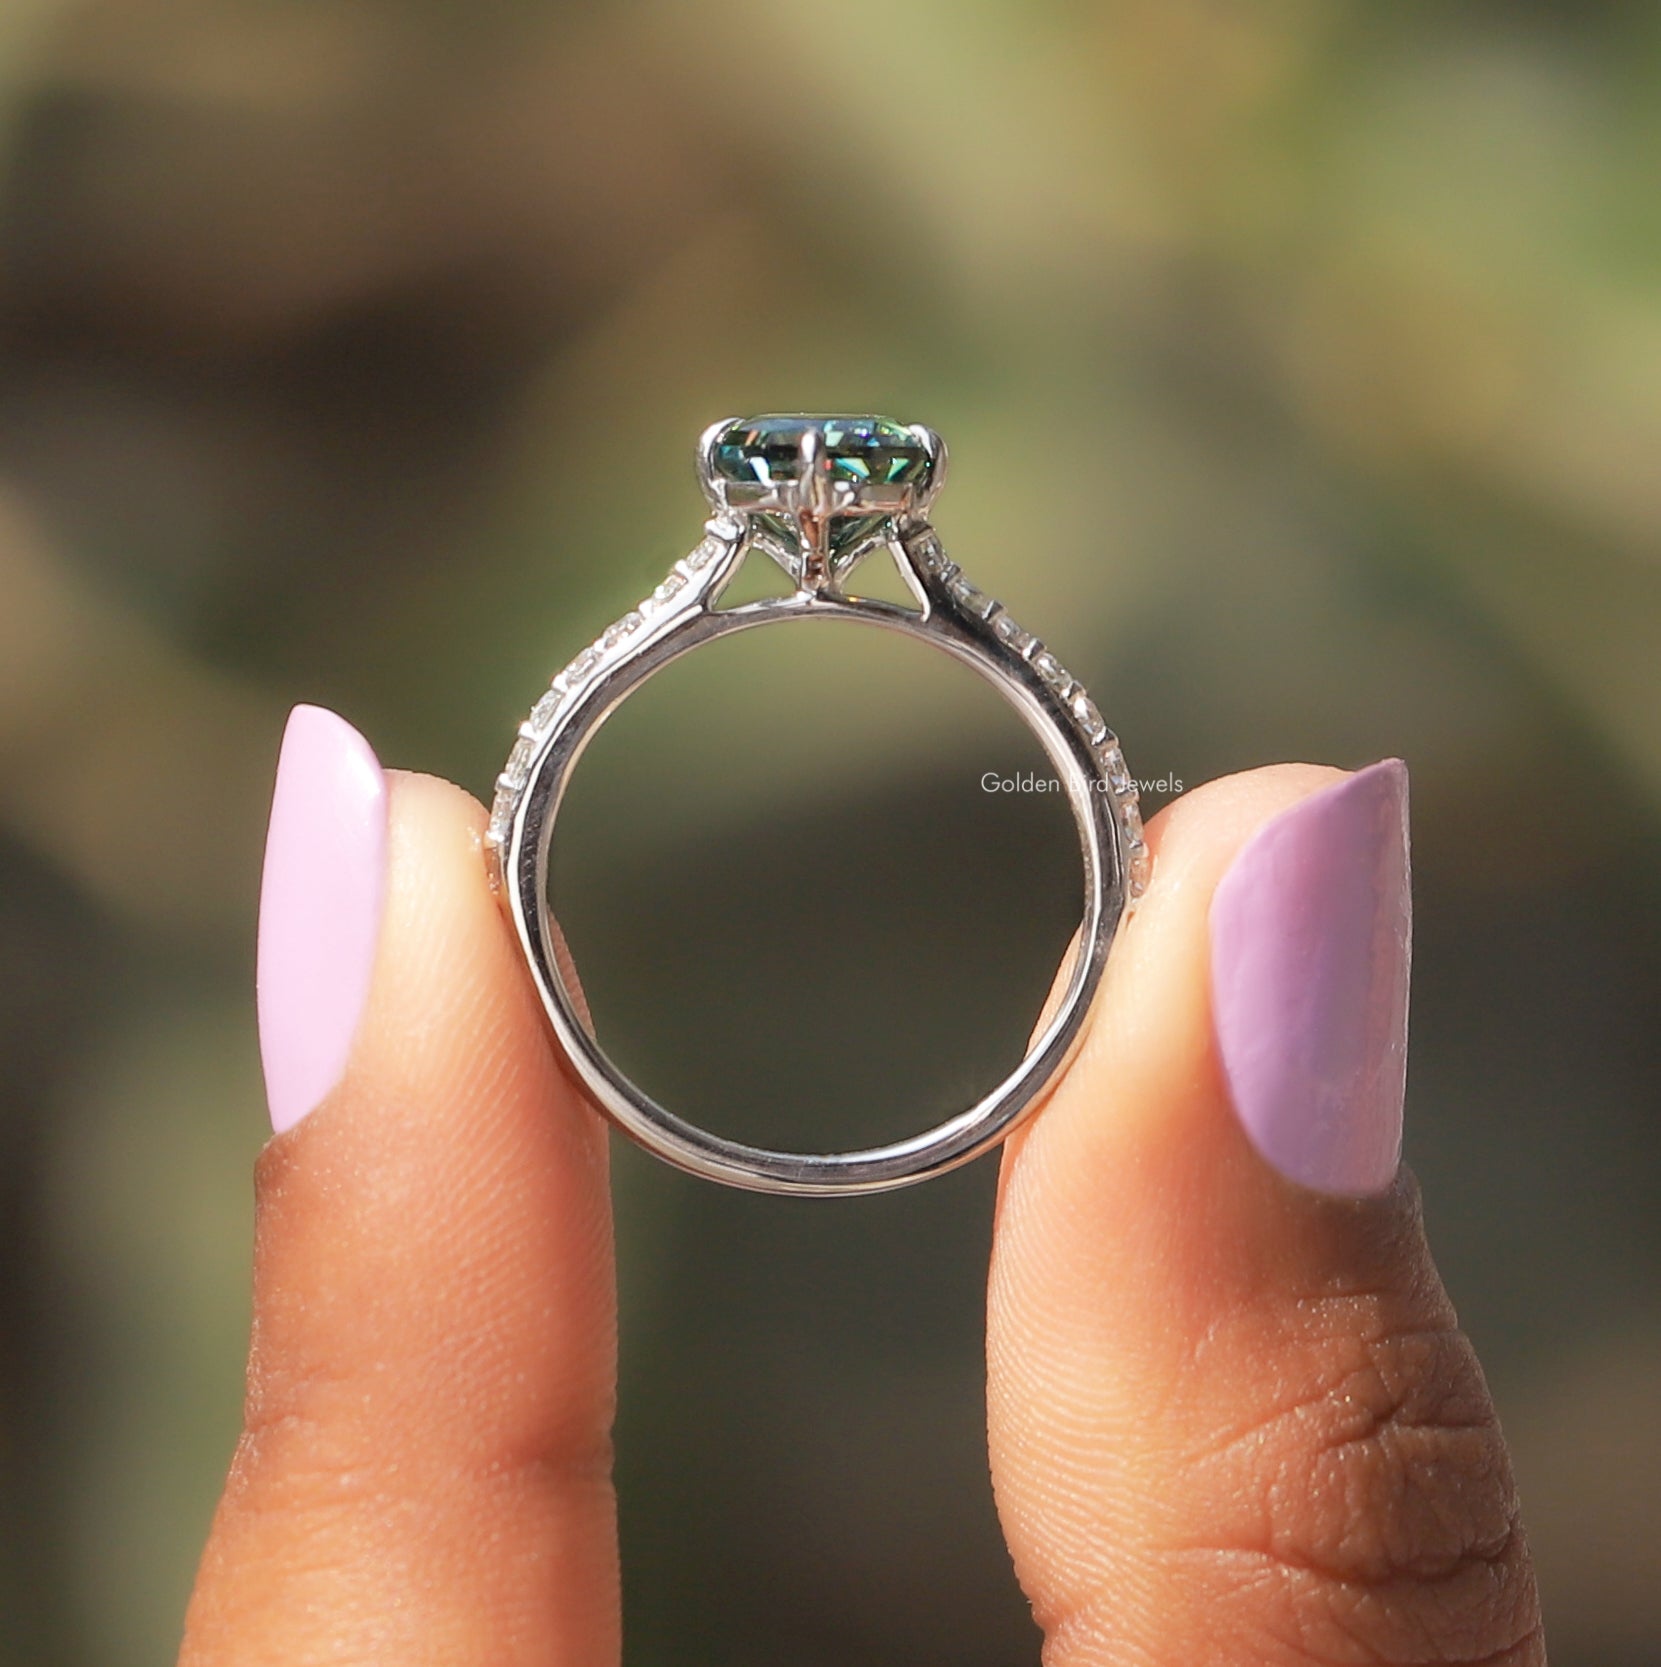 [This radiant cut moissanite ring made of cathedral setting]-[Golden Bird Jewels]